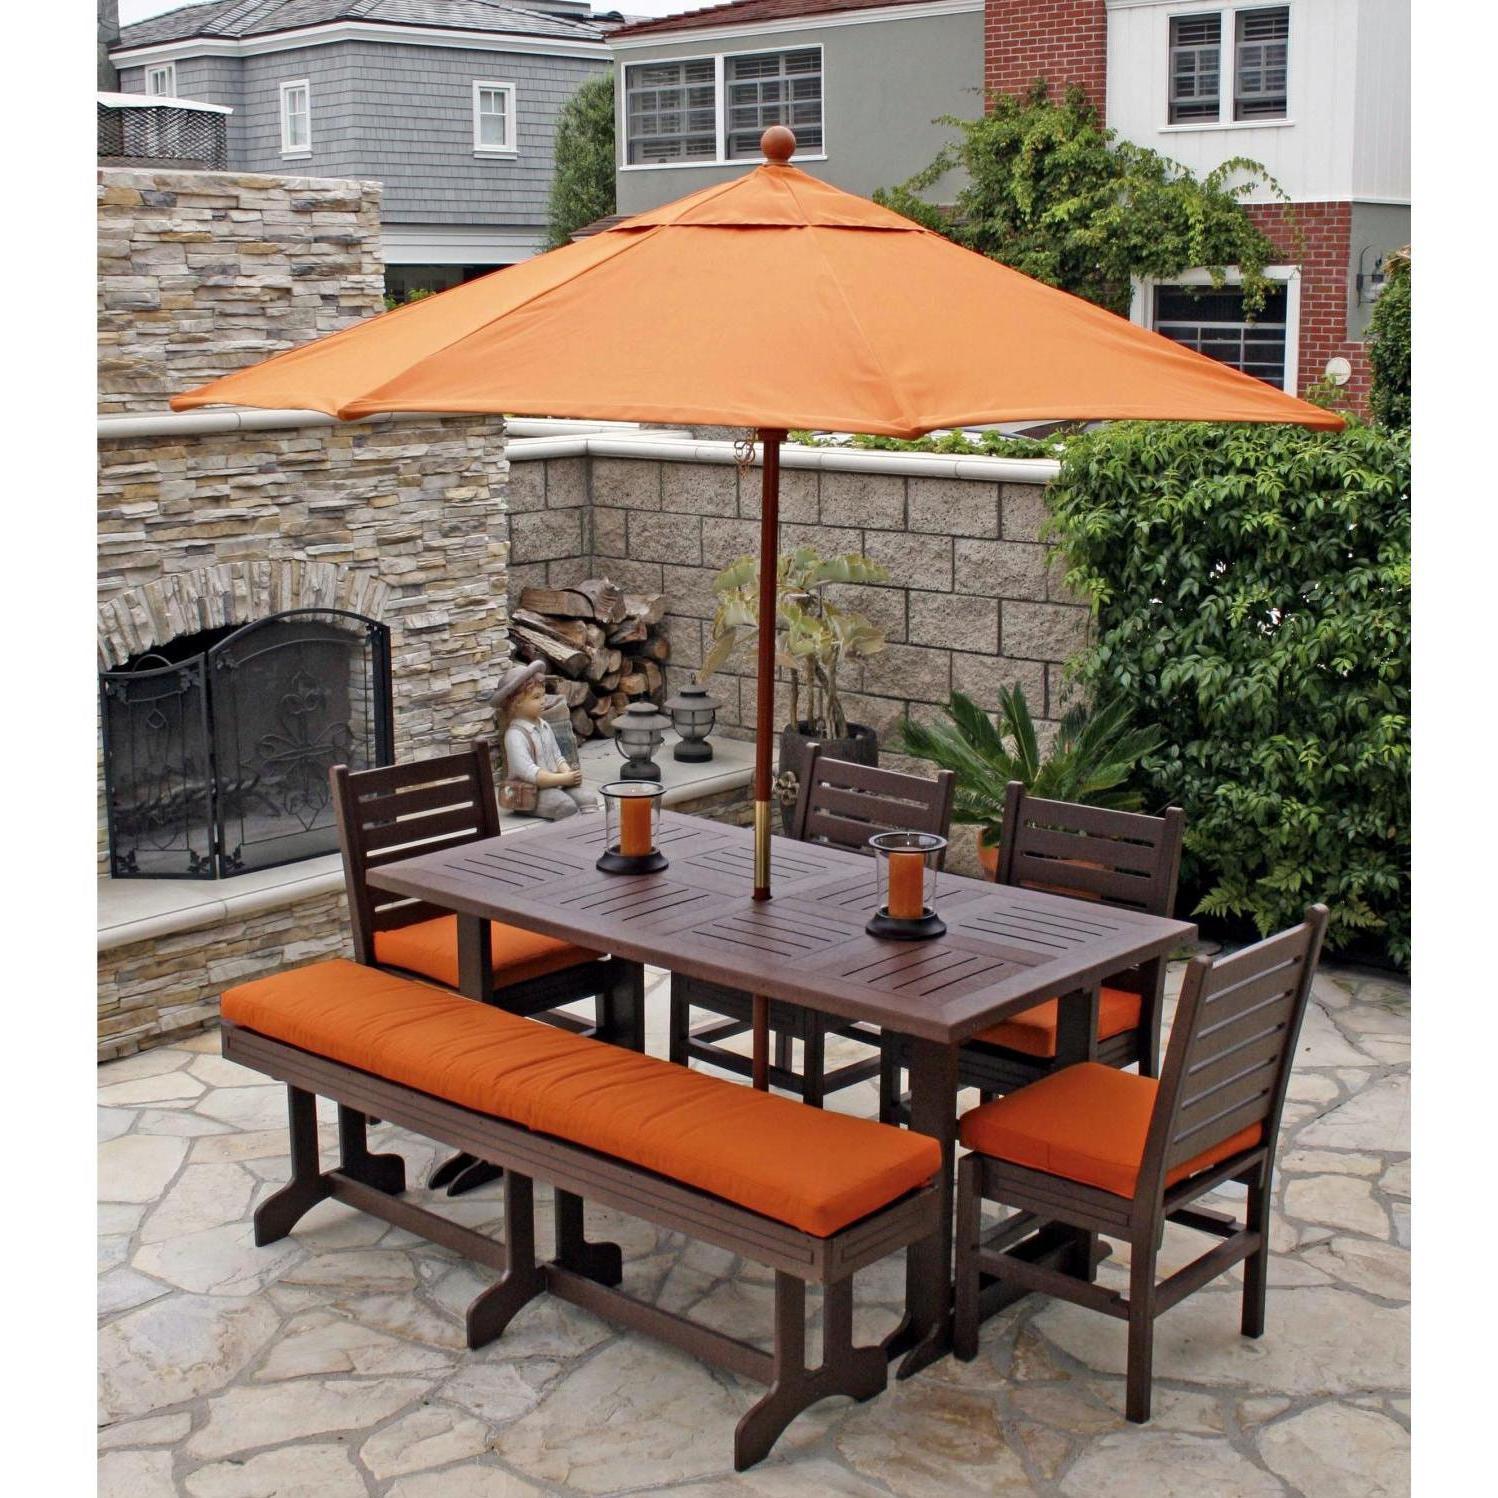 Outdoor dining sets benches